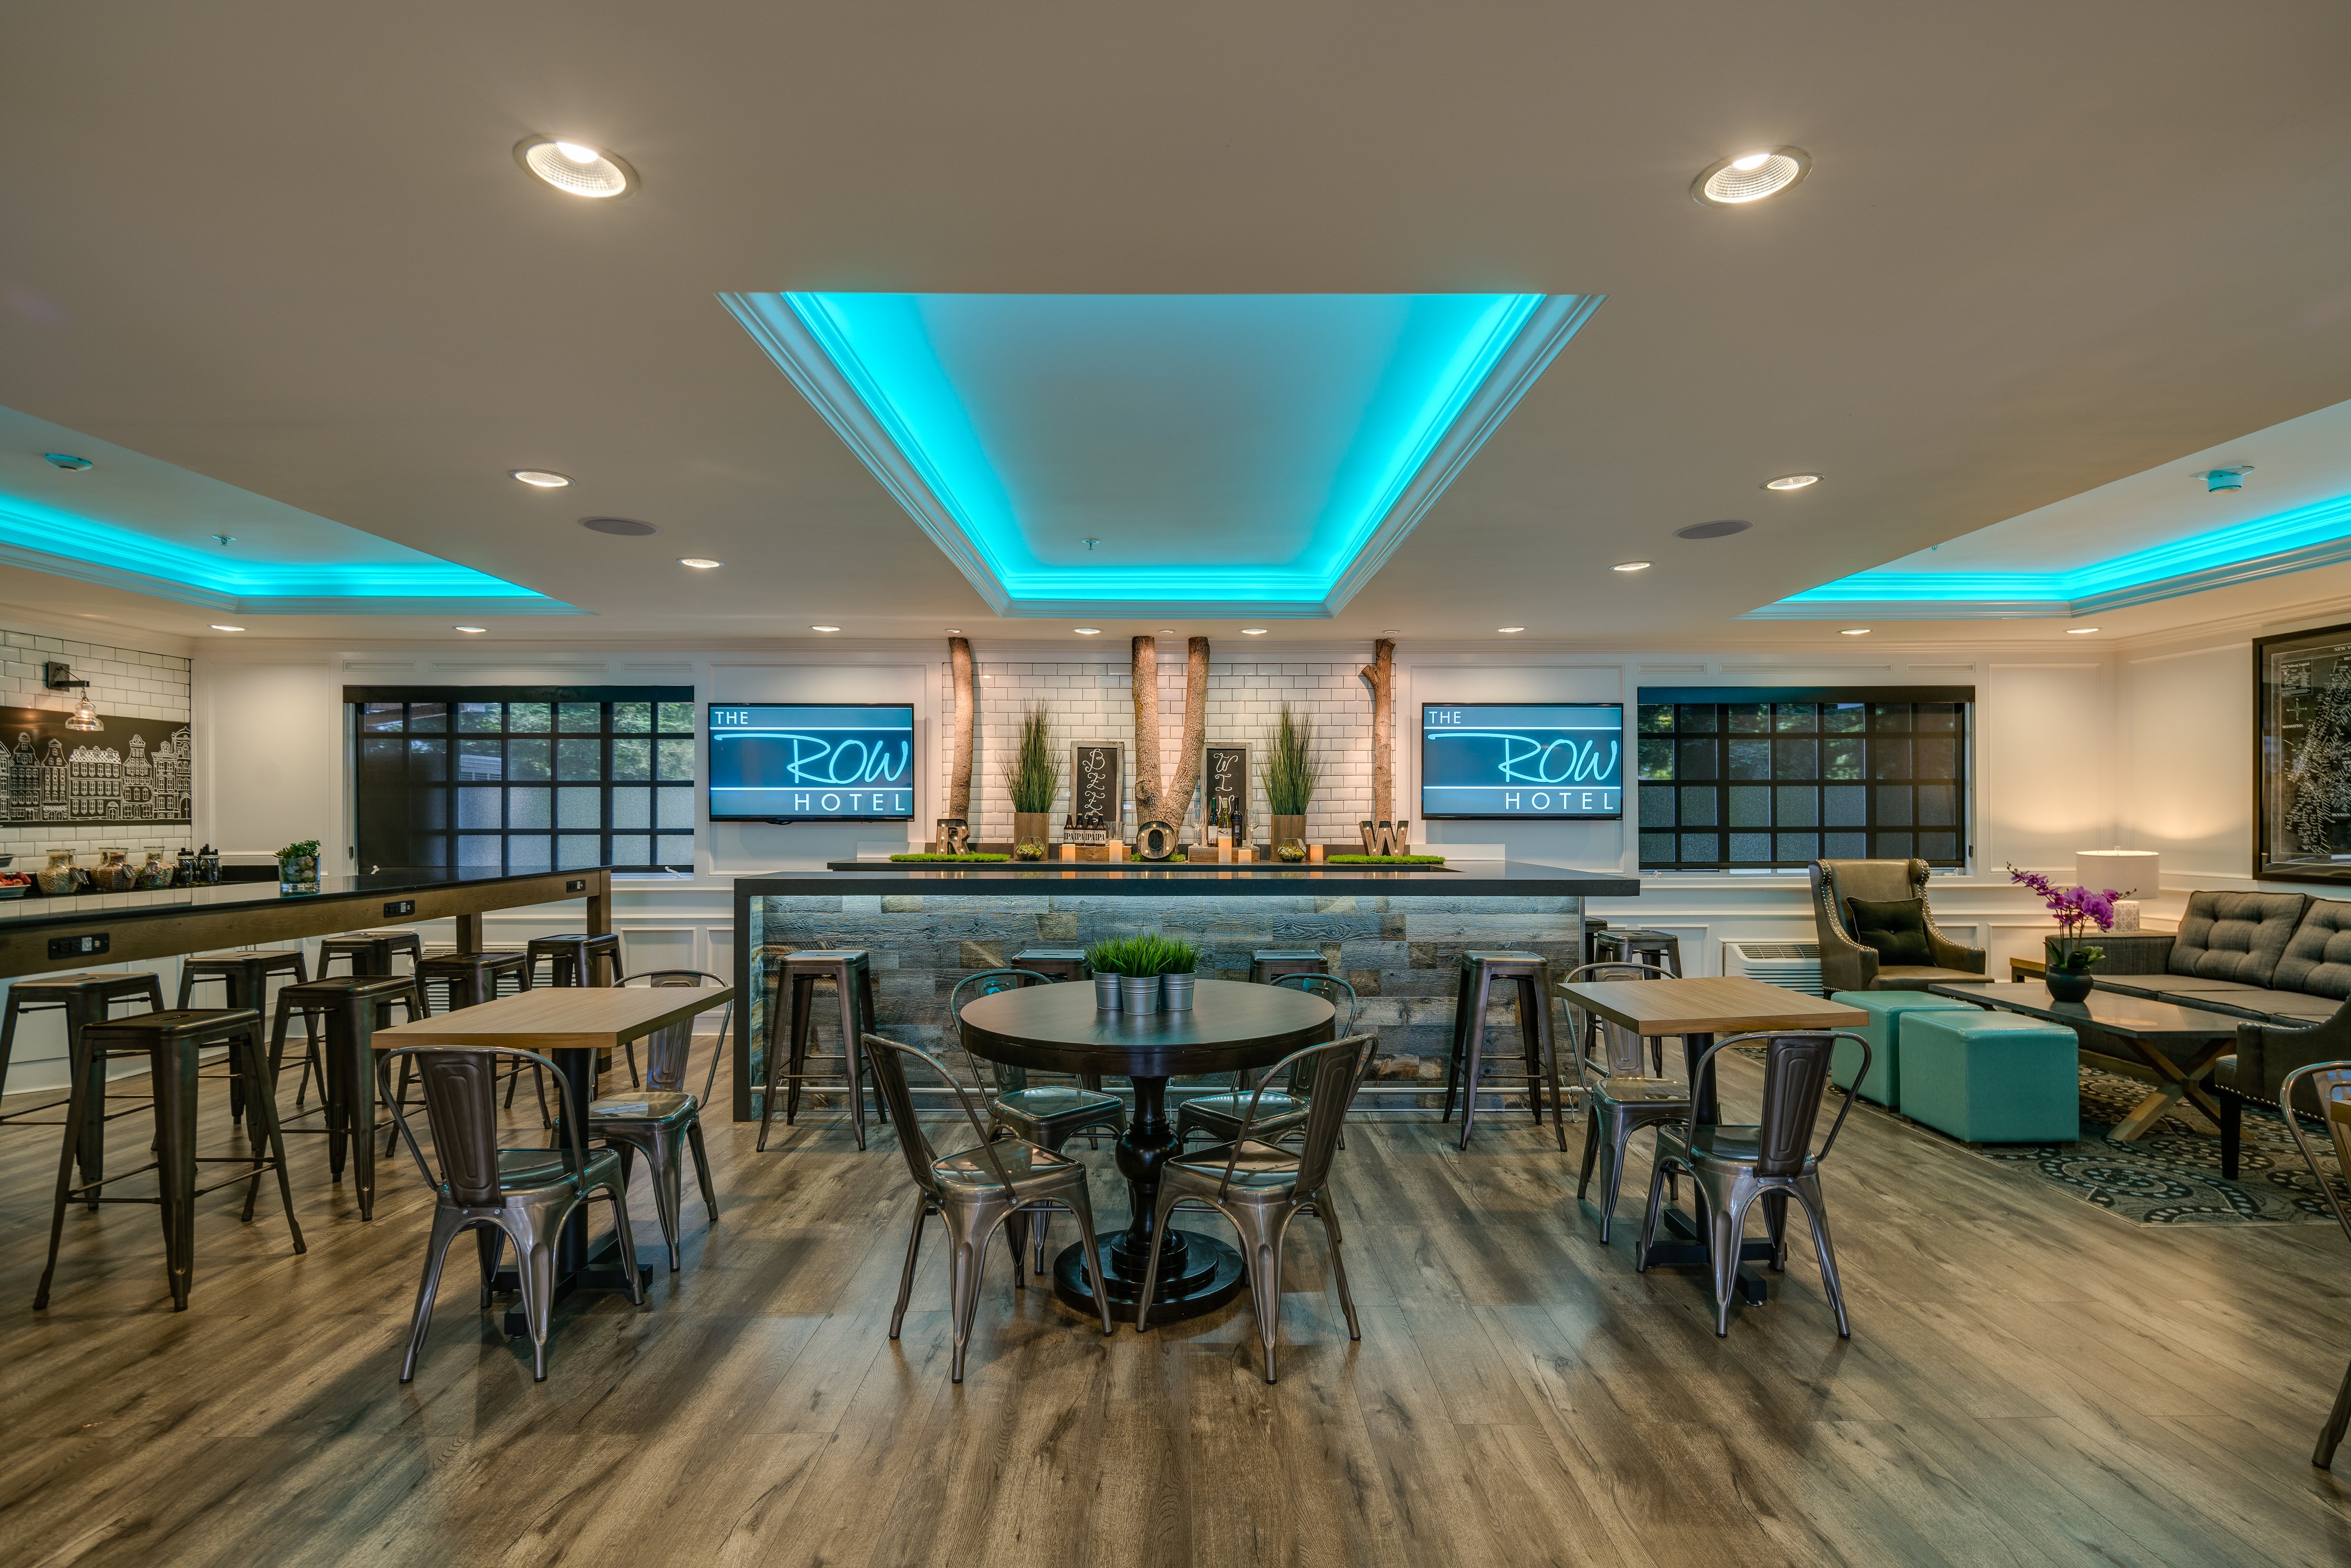 Stay Cal Hospitality Group selects SkyTouch